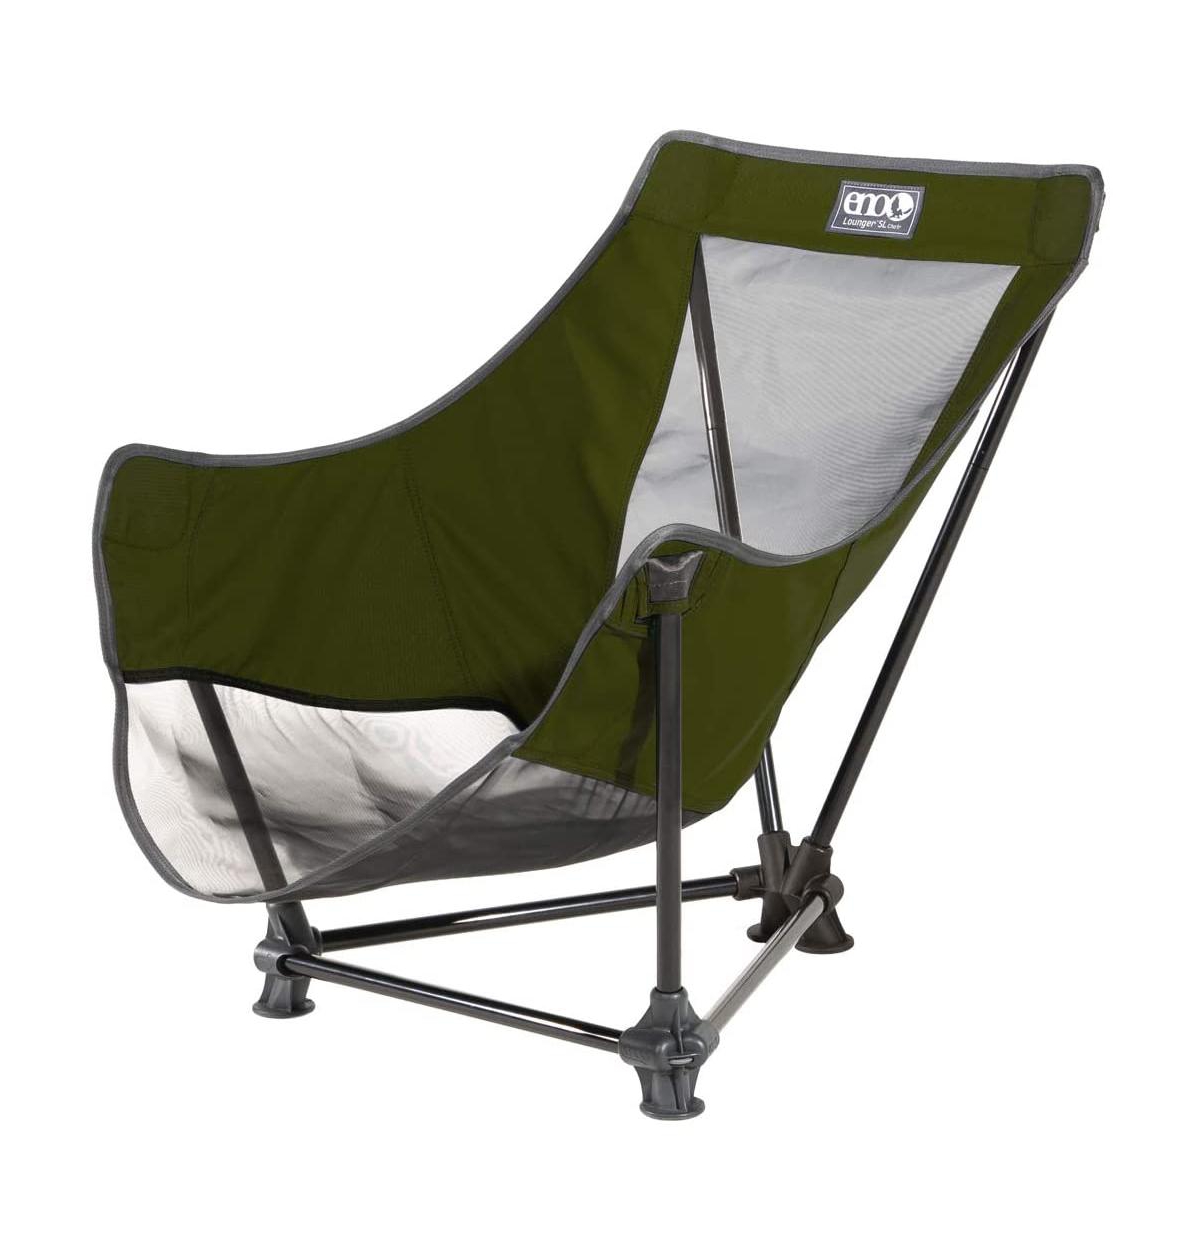 Lounger Sl Chair - Lightweight Portable Outdoor Hiking, Backpacking, Beach, Camping, and Festival Hammock Chair - Olive - Olive